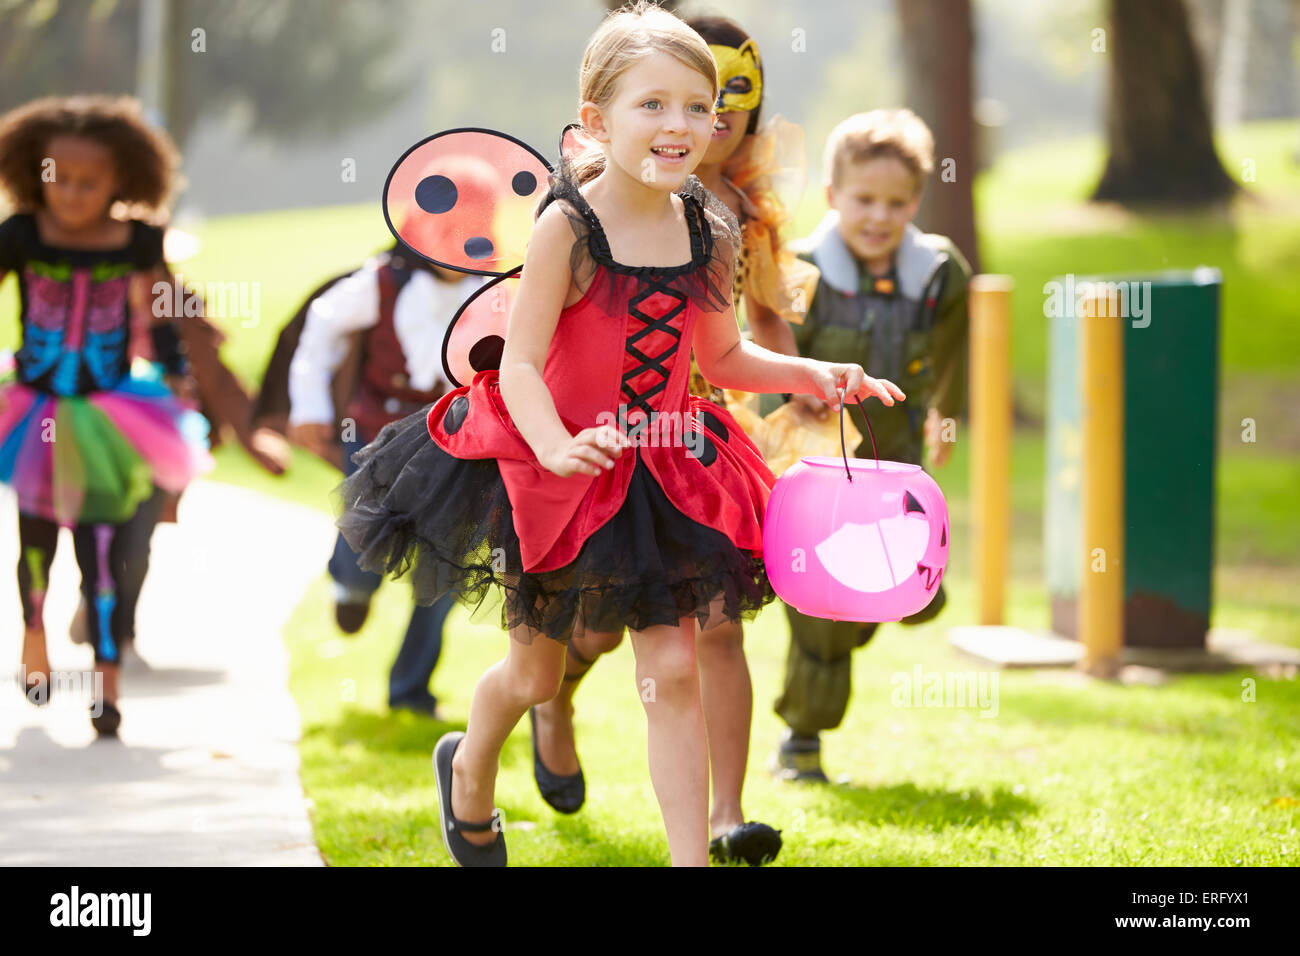 Children In Fancy Costume Dress Going Trick Or Treating Stock Photo